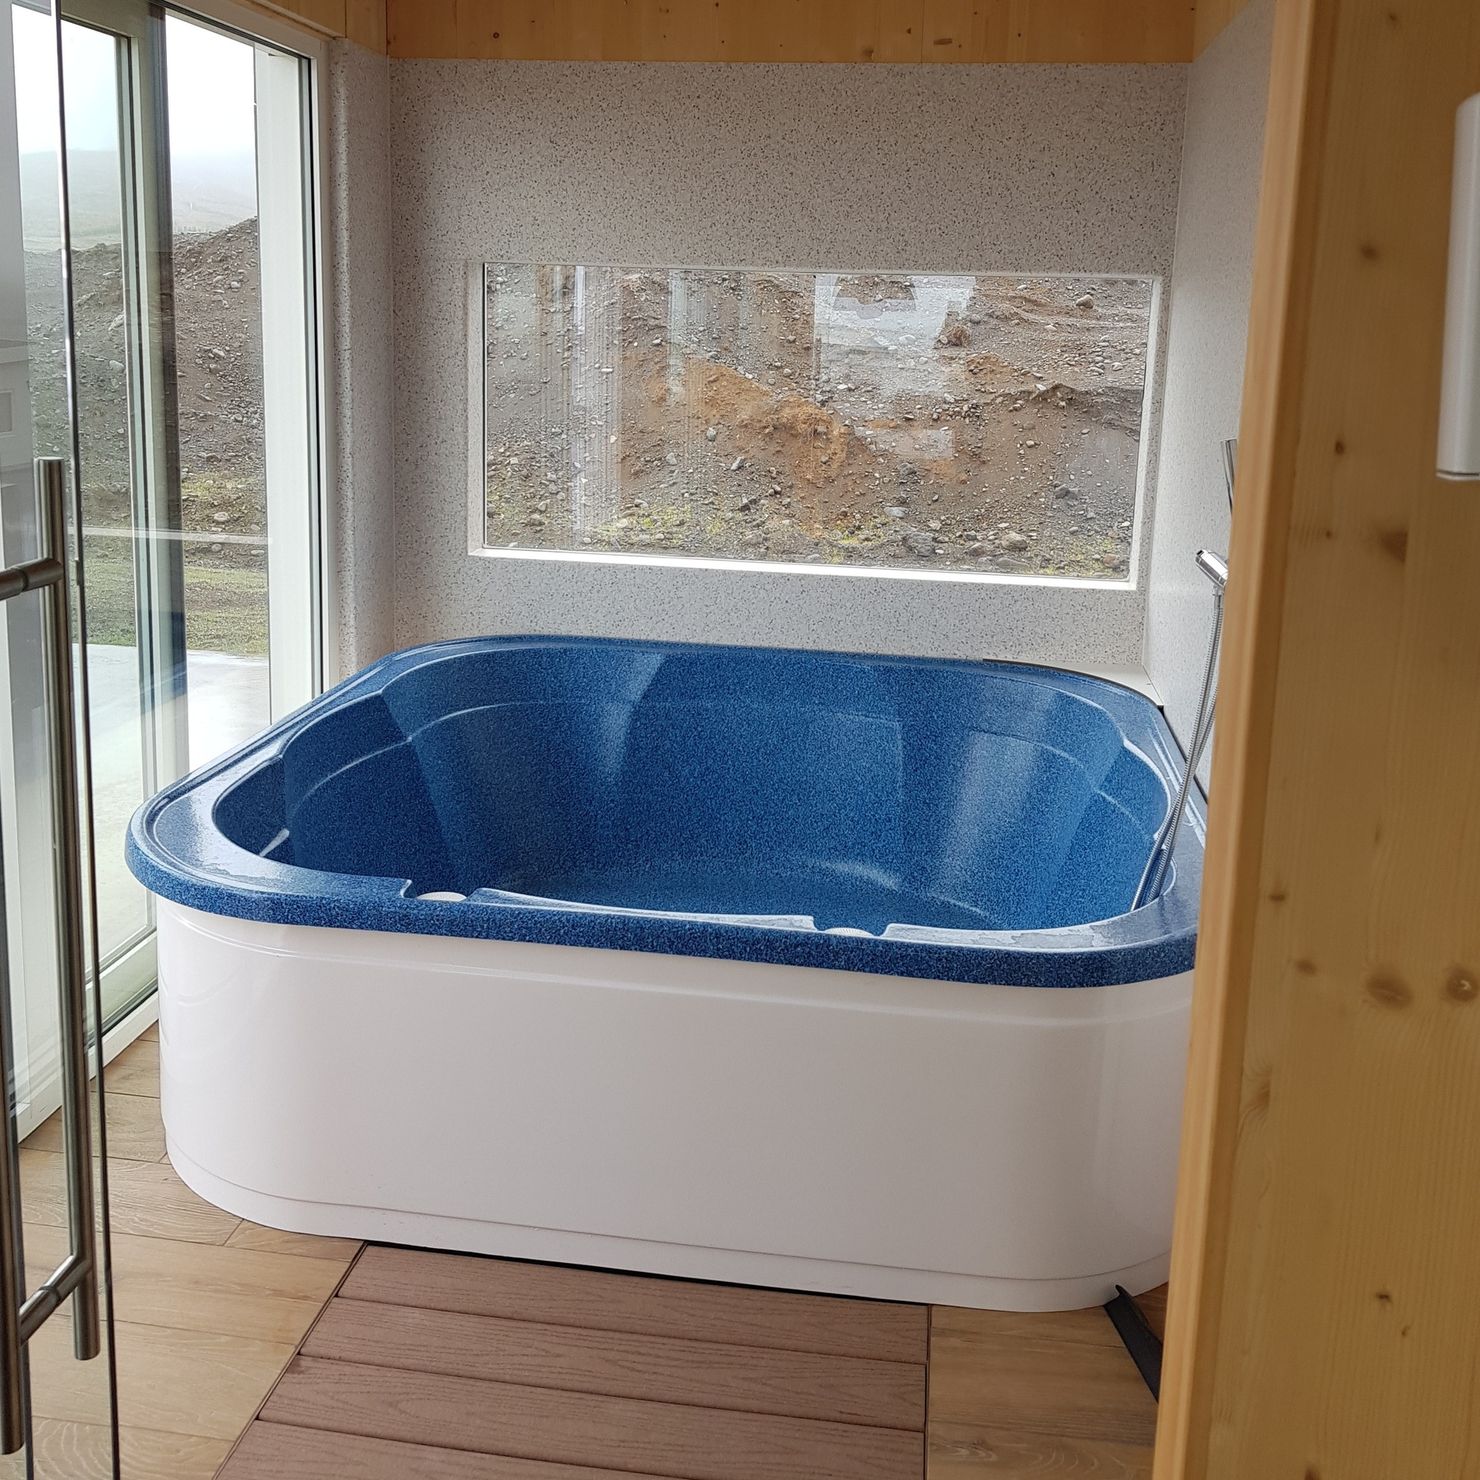 The hot tub is inside